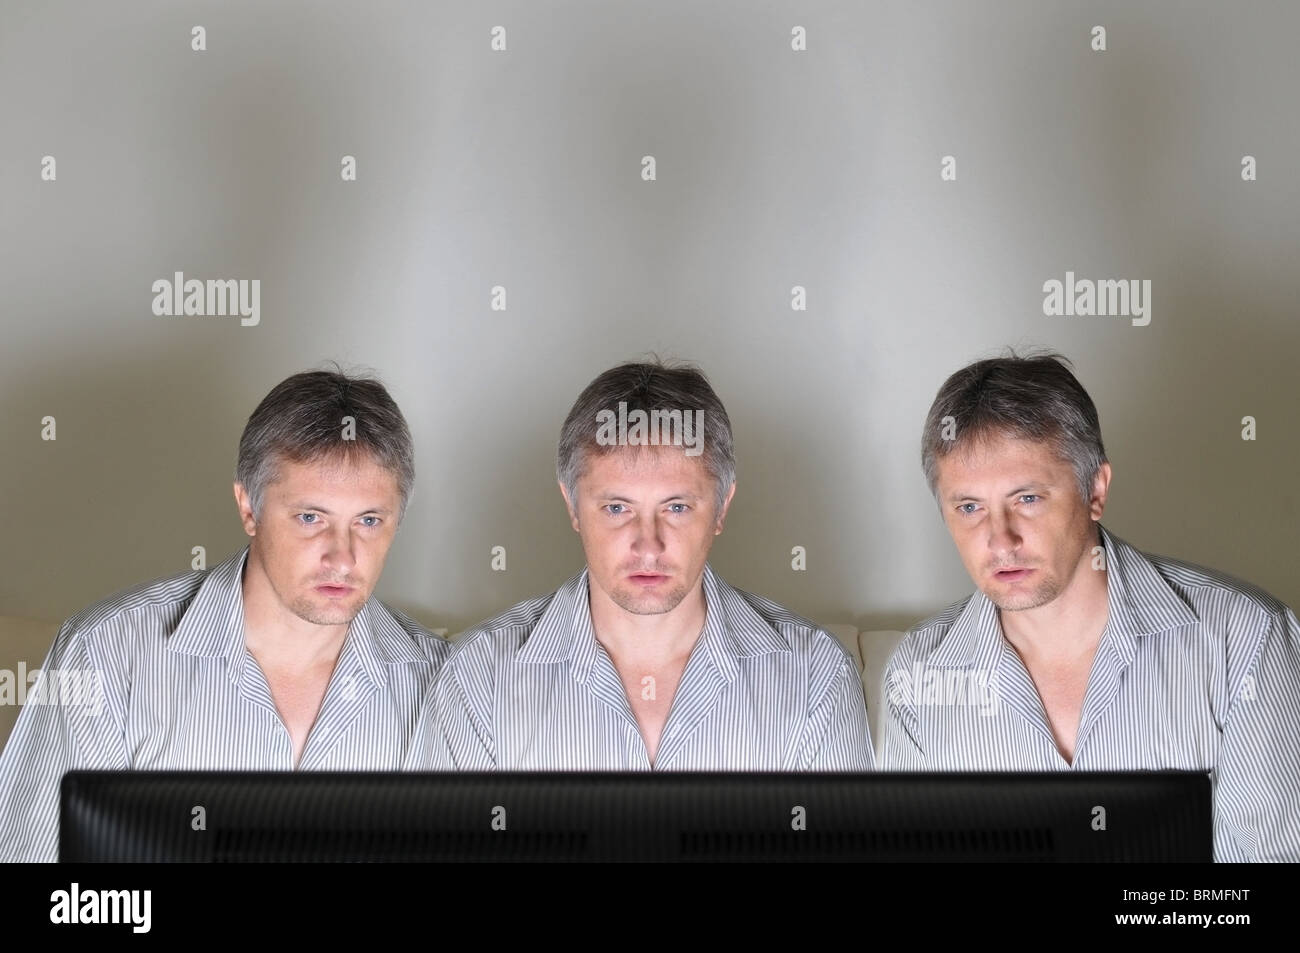 Three identical clones or triplets watching television or a computer screen together Stock Photo